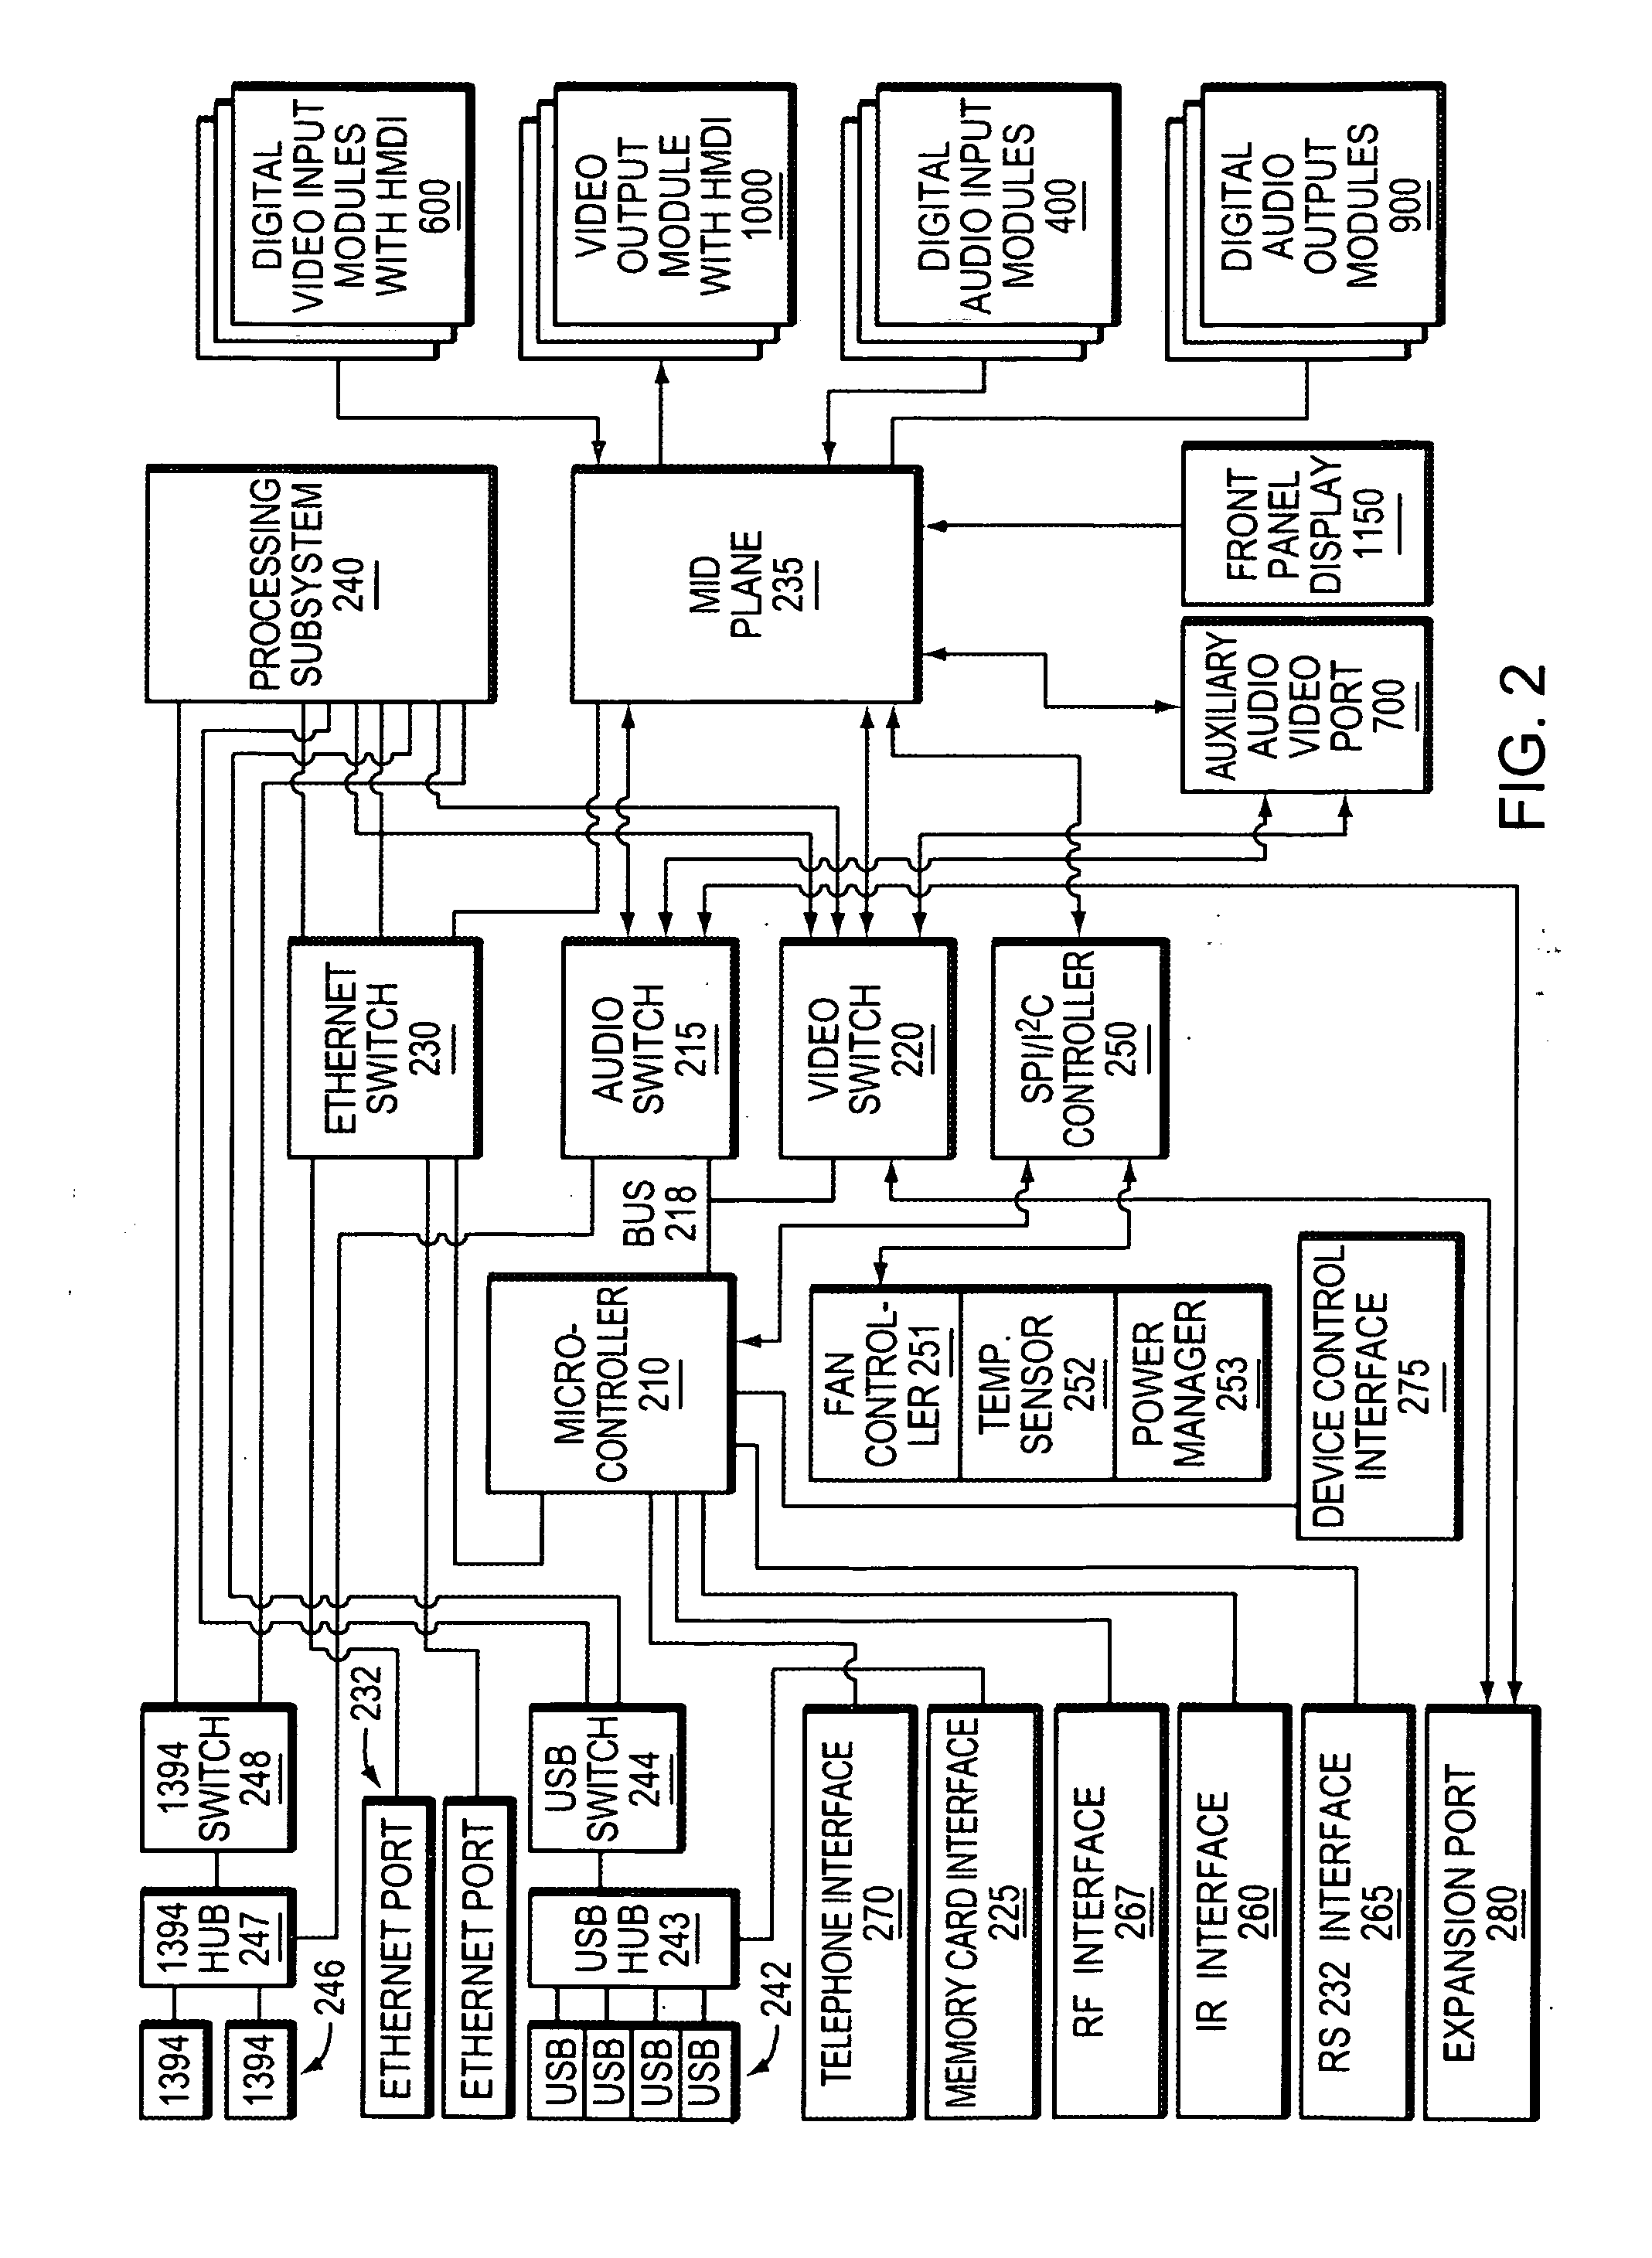 Programmable multimedia controller with programmable services